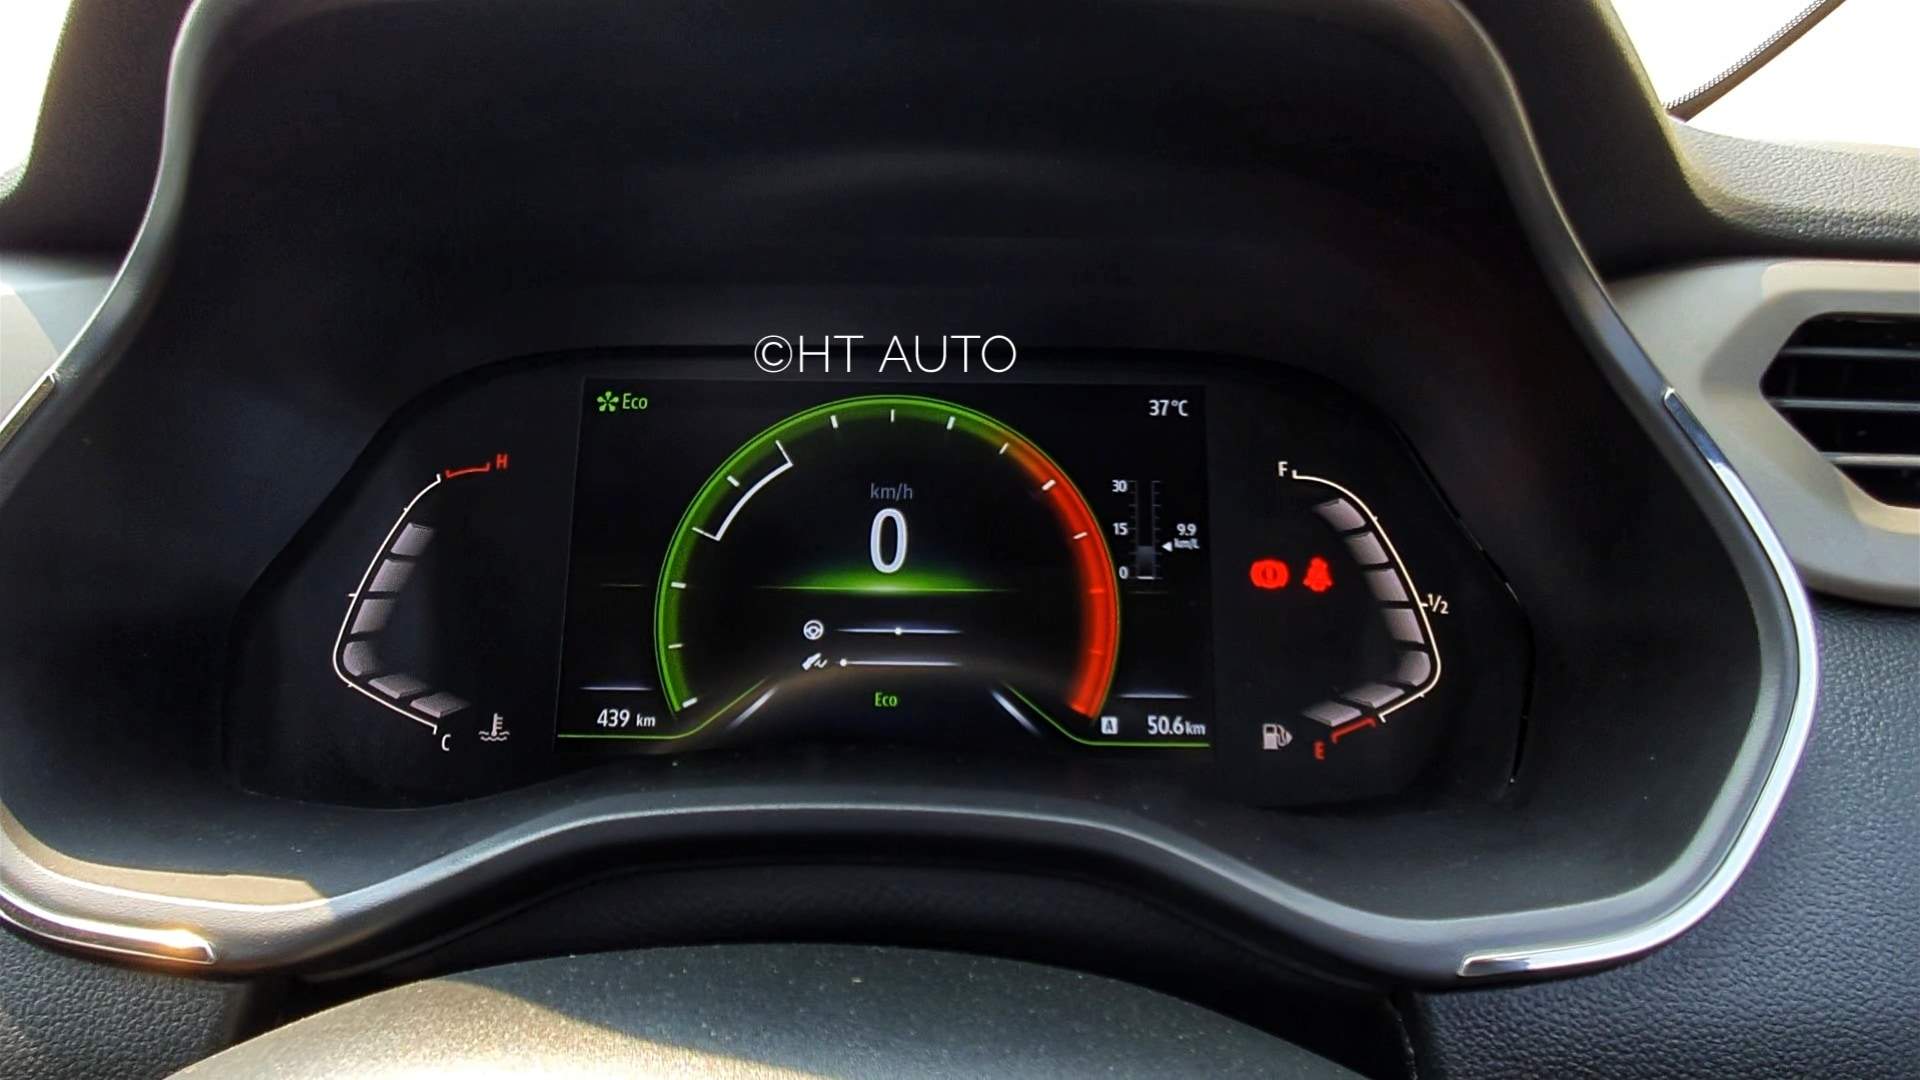 While the engine temperature and fuel displays on either side of the TFT screen are similar to the one inside Magnite's drive screen, the other display formats are less loud and more to the point. (HT Auto/Sabyasachi Dasgupta)